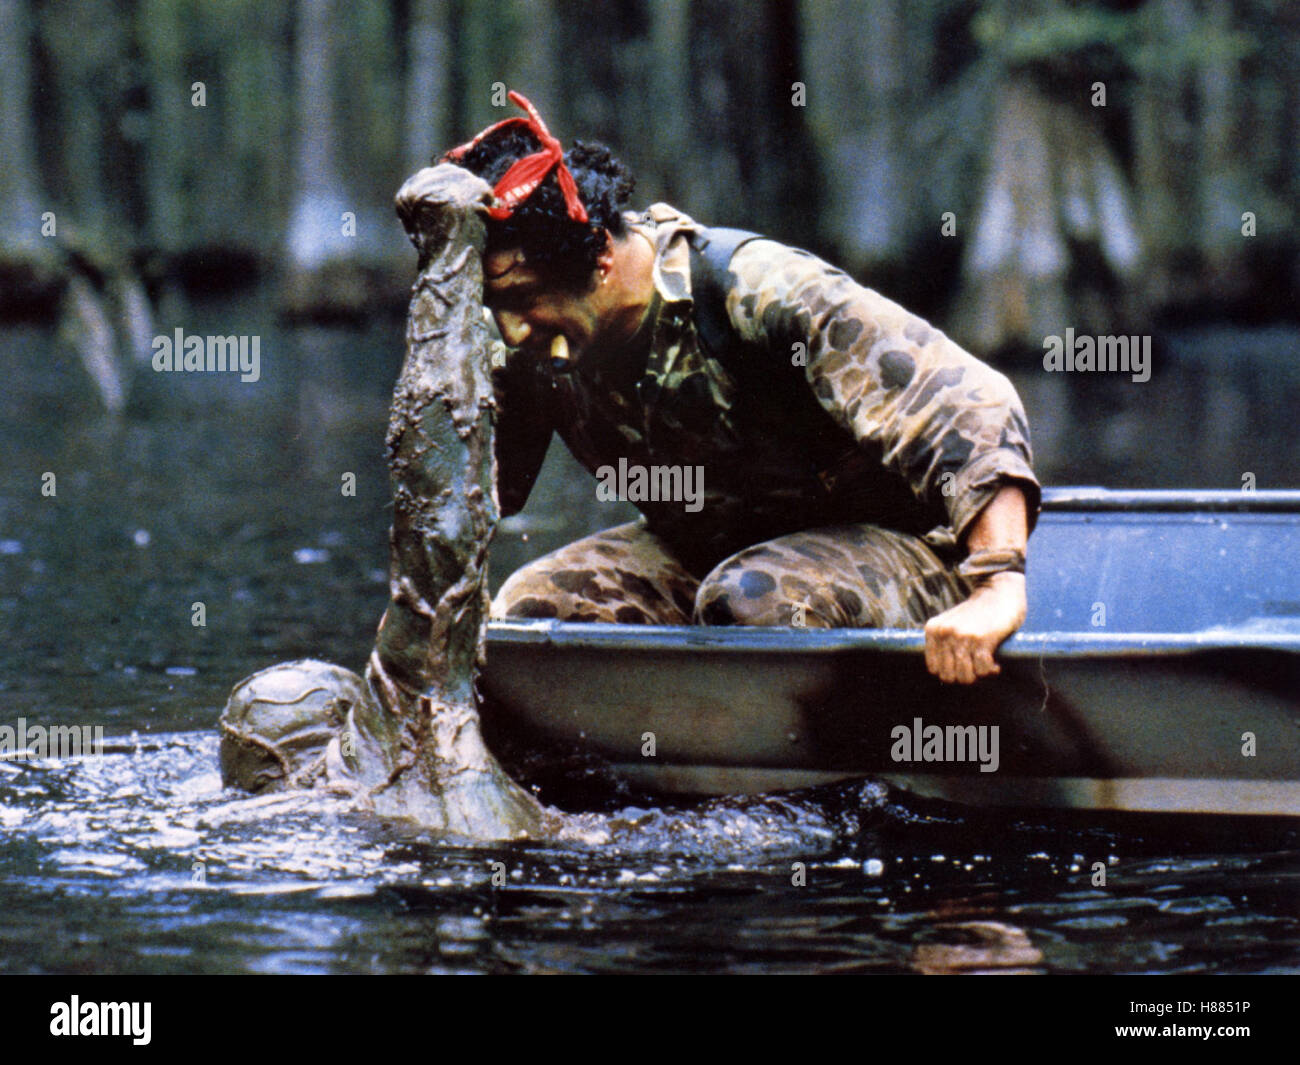 Das Ding aus dem Sumpf, (THE SWAMP THING) USA 1981, Regie: Wes Craven, Stichwort: Monster, Boot, Angriff Stock Photo